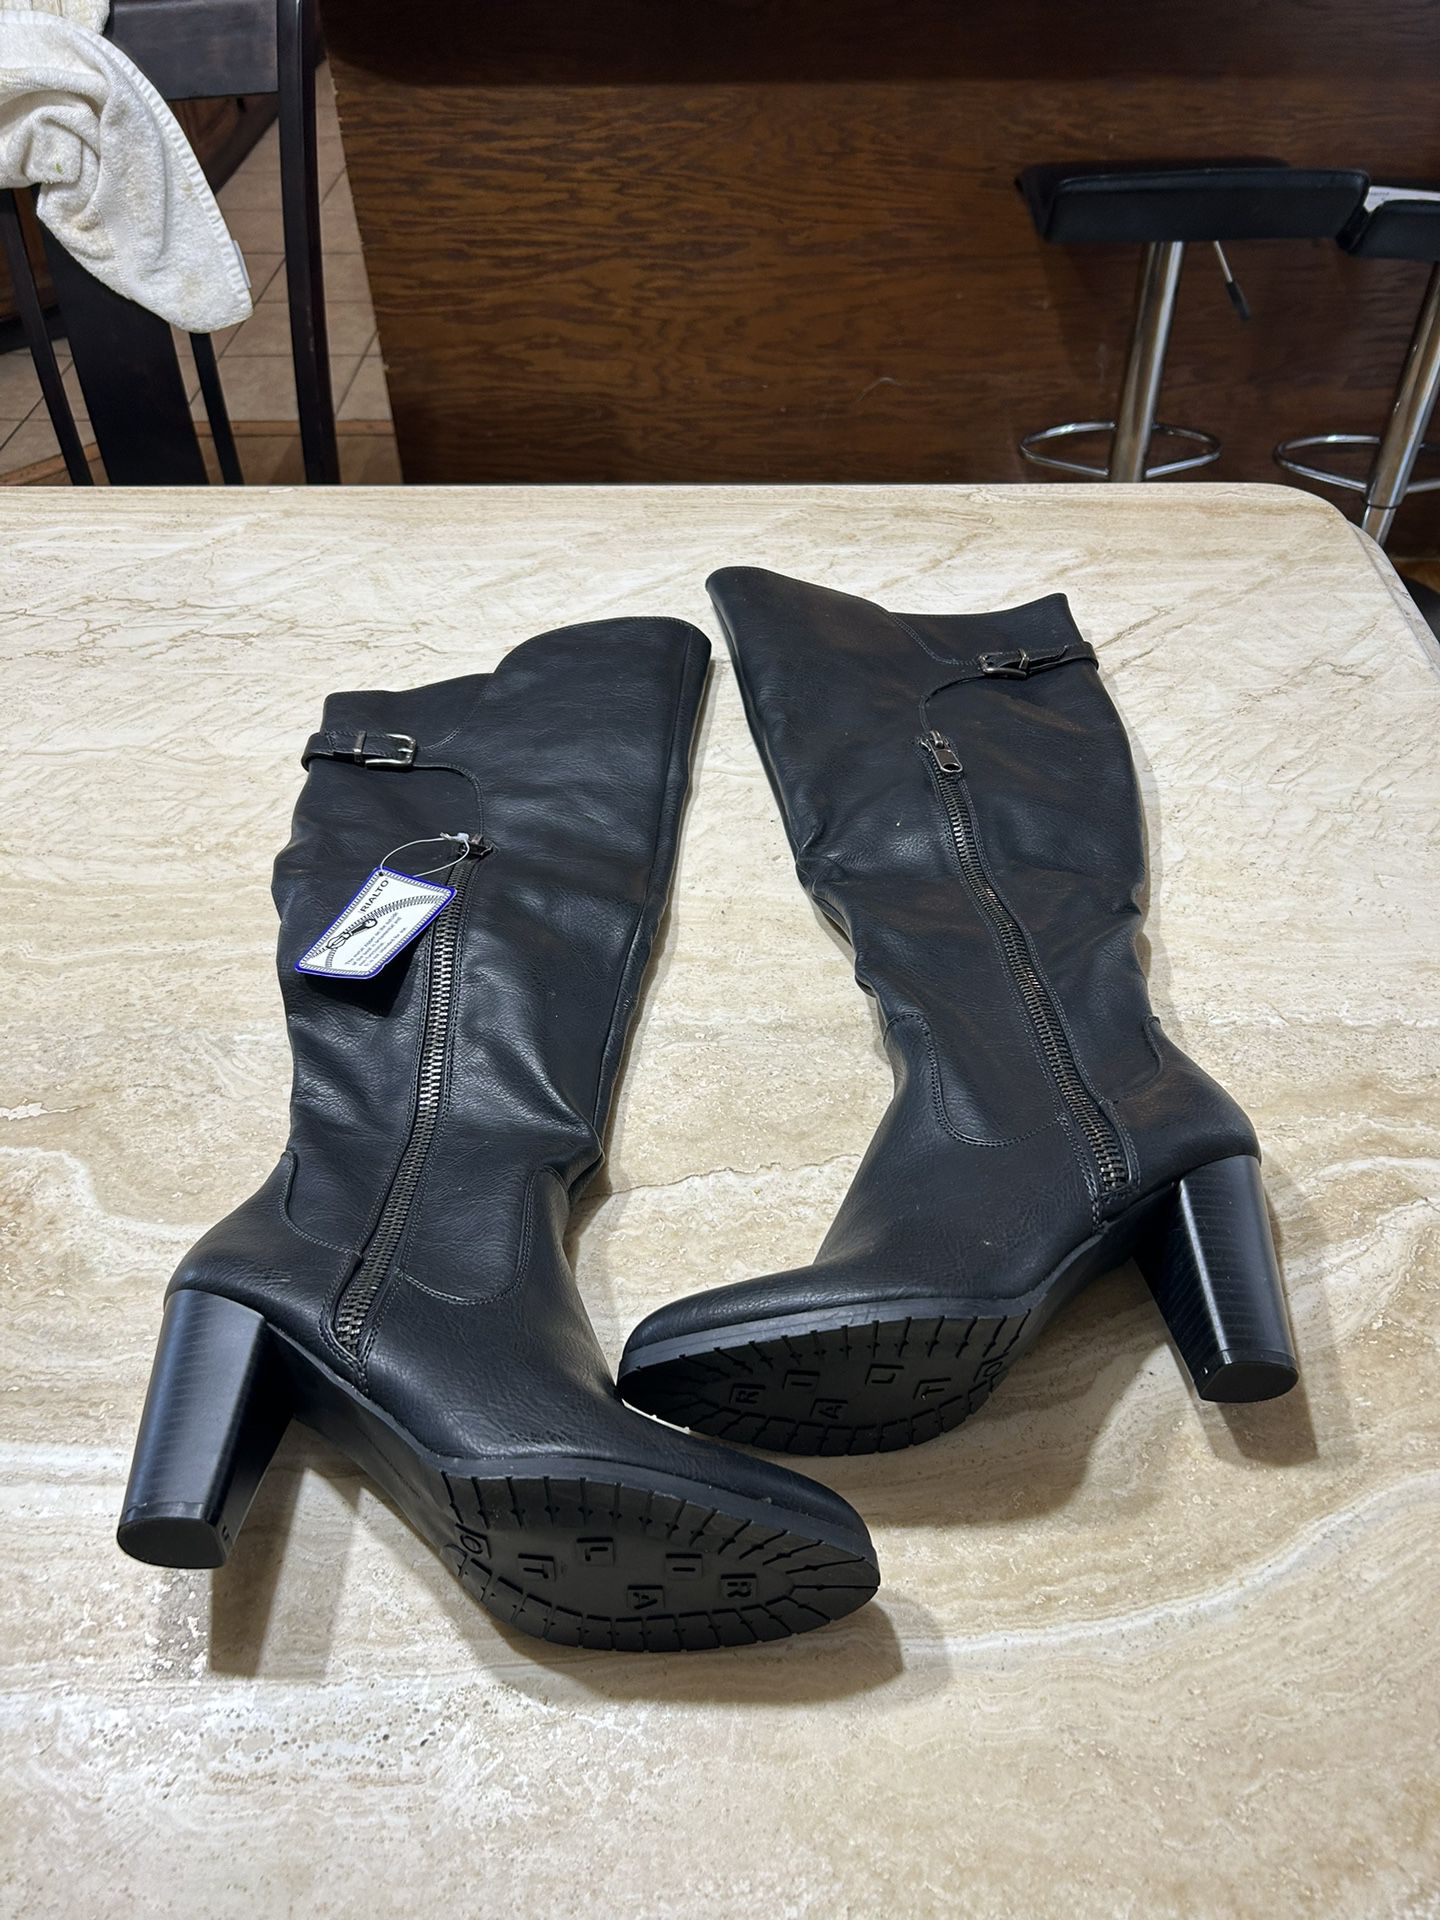  Brand New Over The Knee Boots Size 11